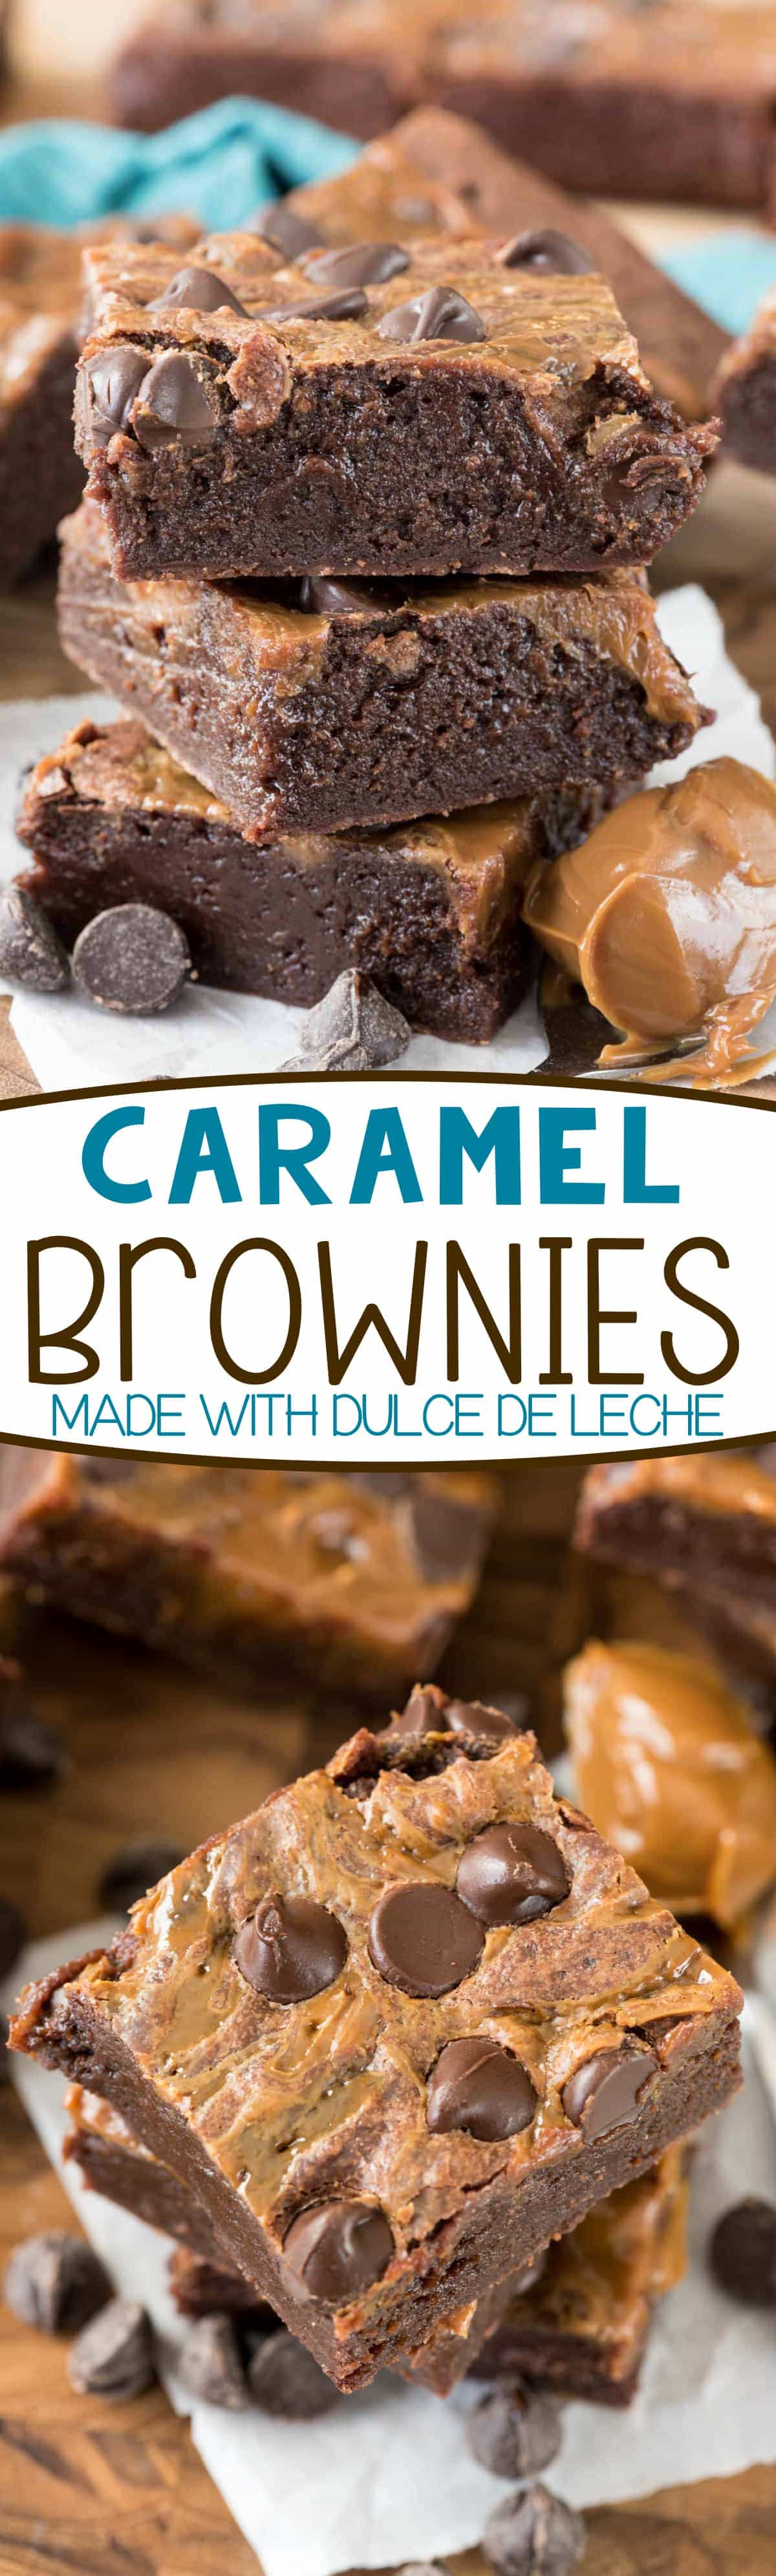 Fudgy Caramel Brownies - this easy brownie recipe is topped with caramel dulce de leche. The brownies are SO fudgy! We ate them all in a day! 